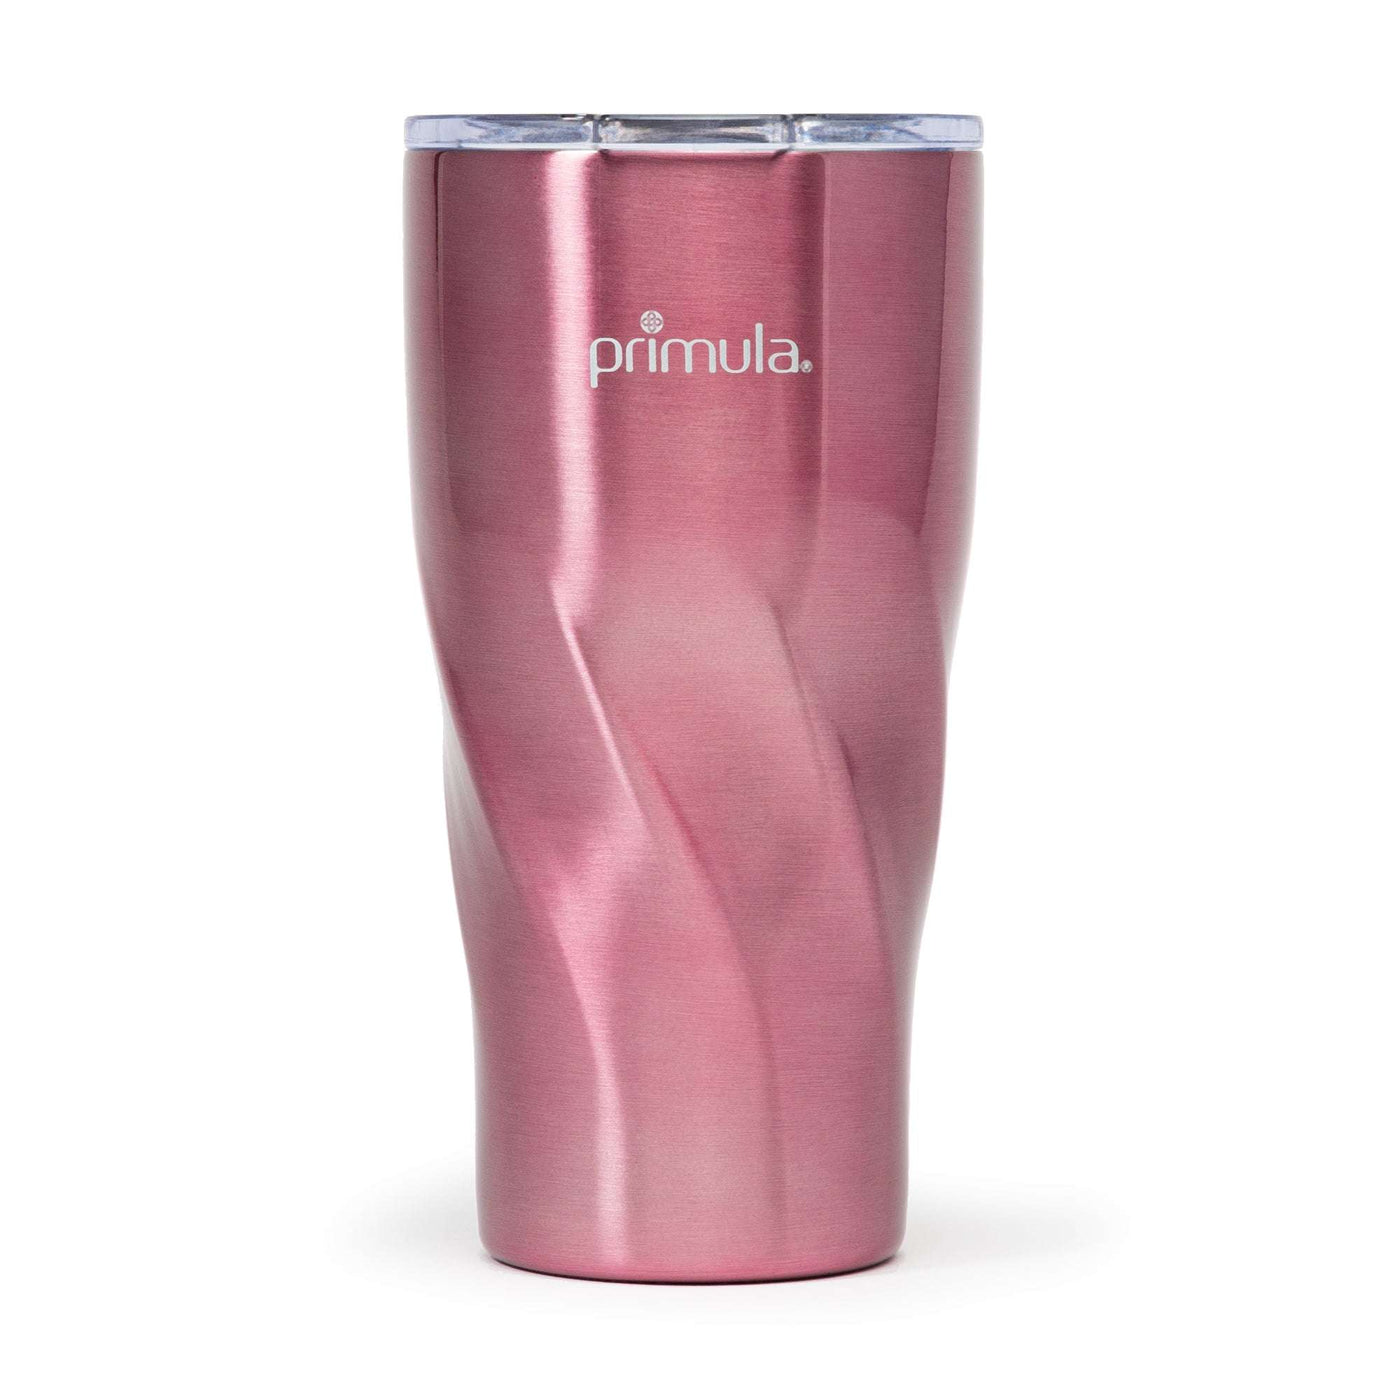 Primula Luster Water Bottle Vacuum Sealed Stainless Steel Thermal Insulated, 17 Ounce, Blush, Pink